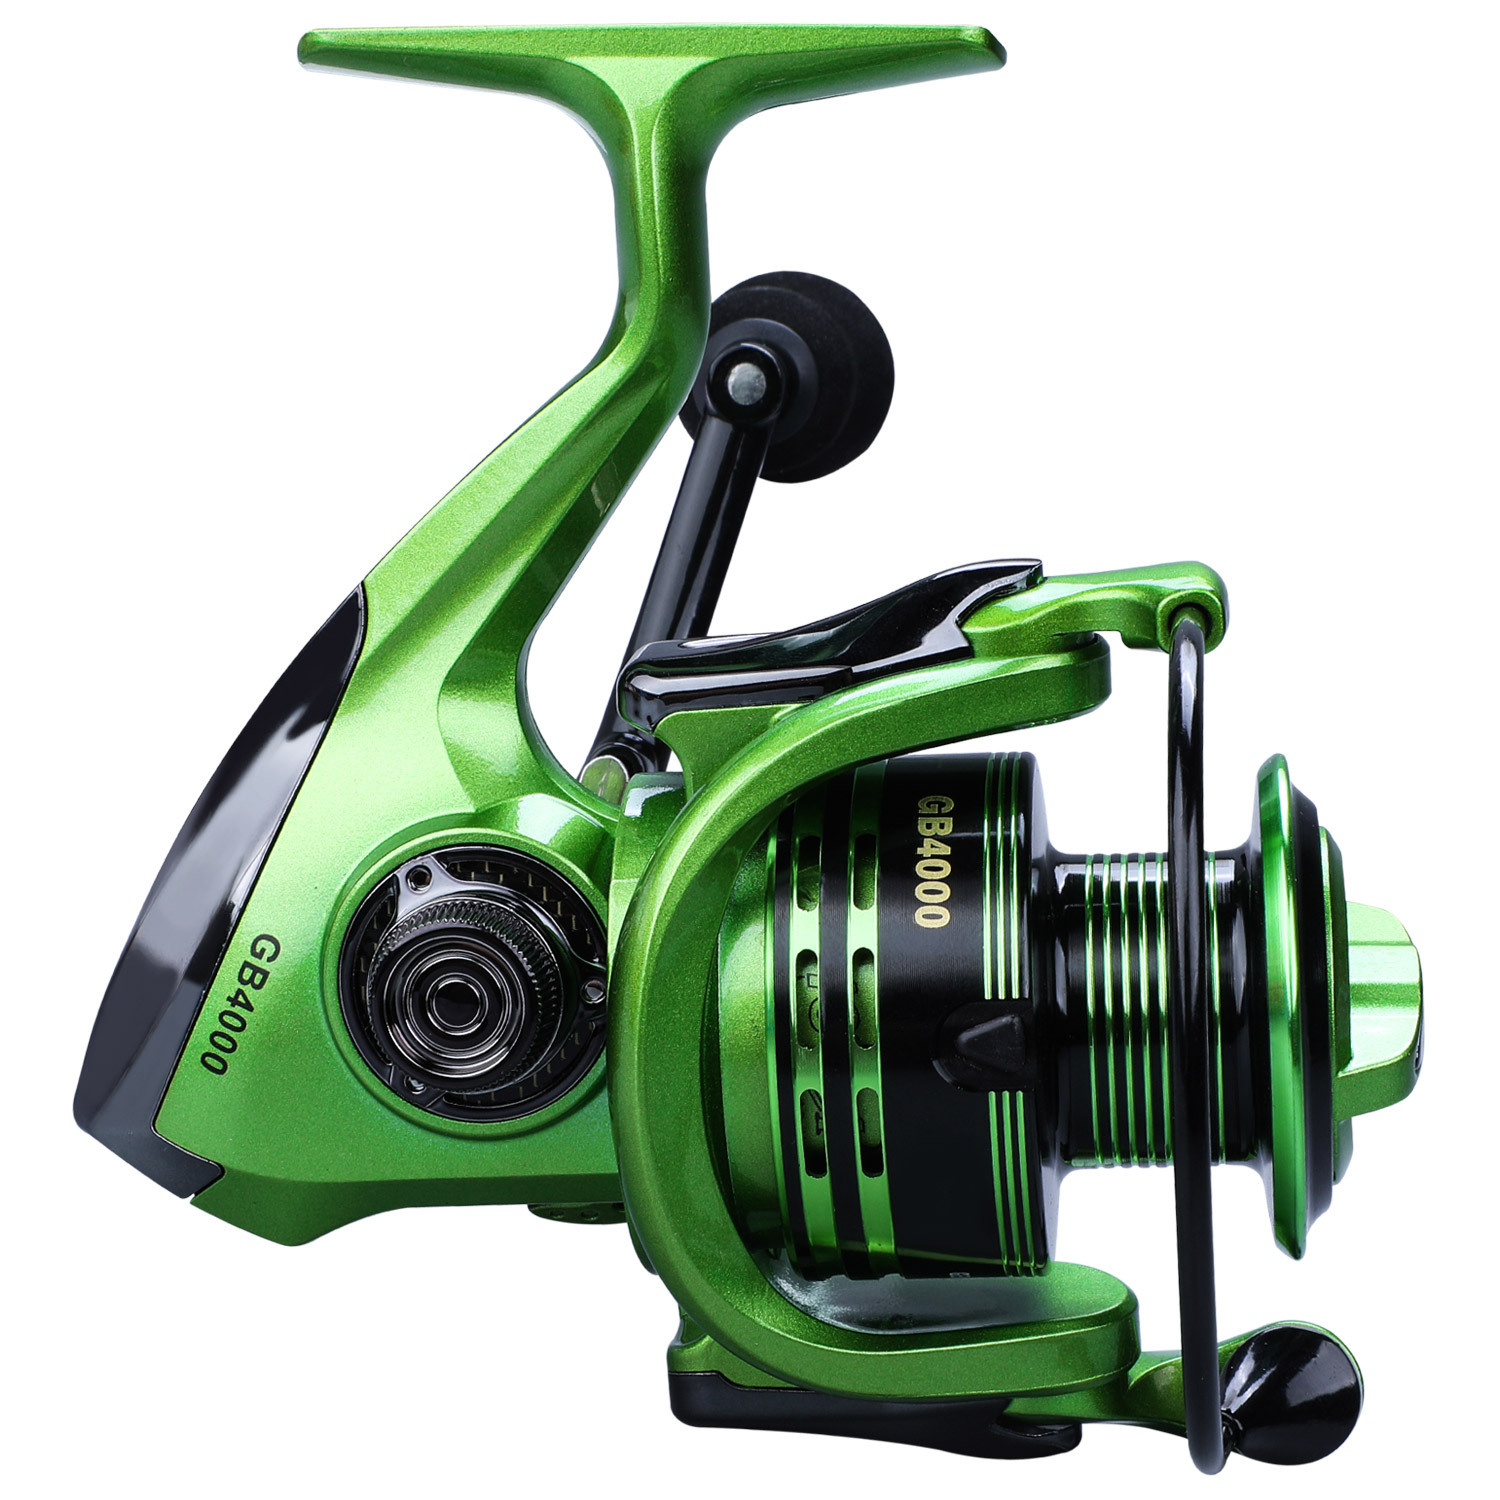  Sougayilang Spinning Fishing Reel, 5.2:1 High Speed Spinning  Reel, Lightweight 11+1BB Ultra Smooth for Saltwater or Freshwater - GT1000  : Sports & Outdoors